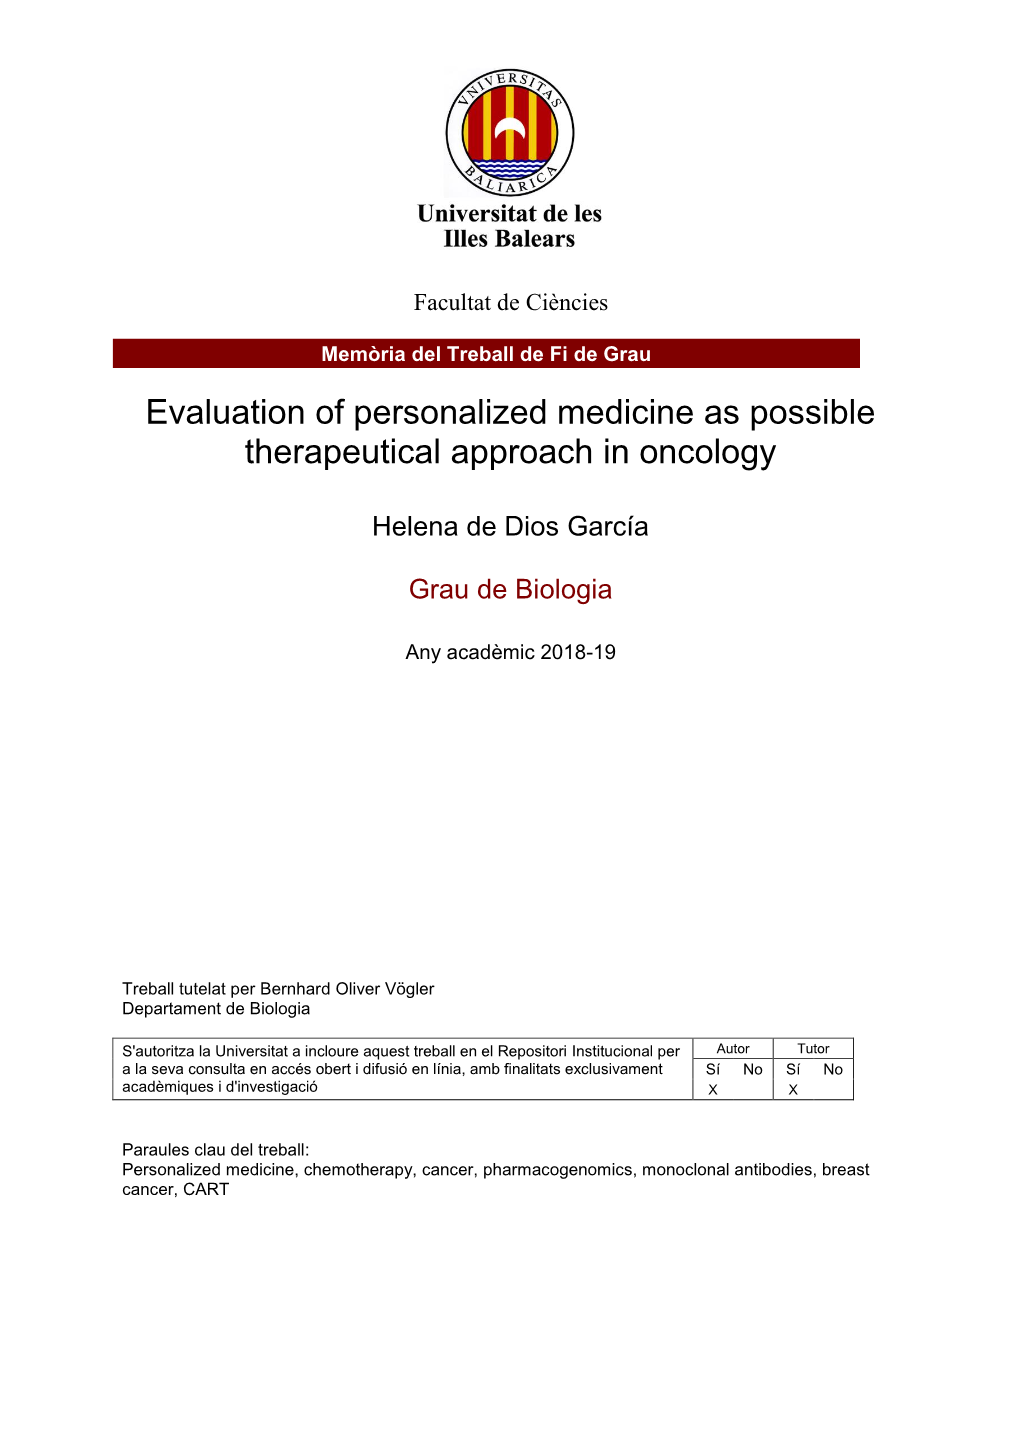 Evaluation of Personalized Medicine As Possible Therapeutical Approach in Oncology